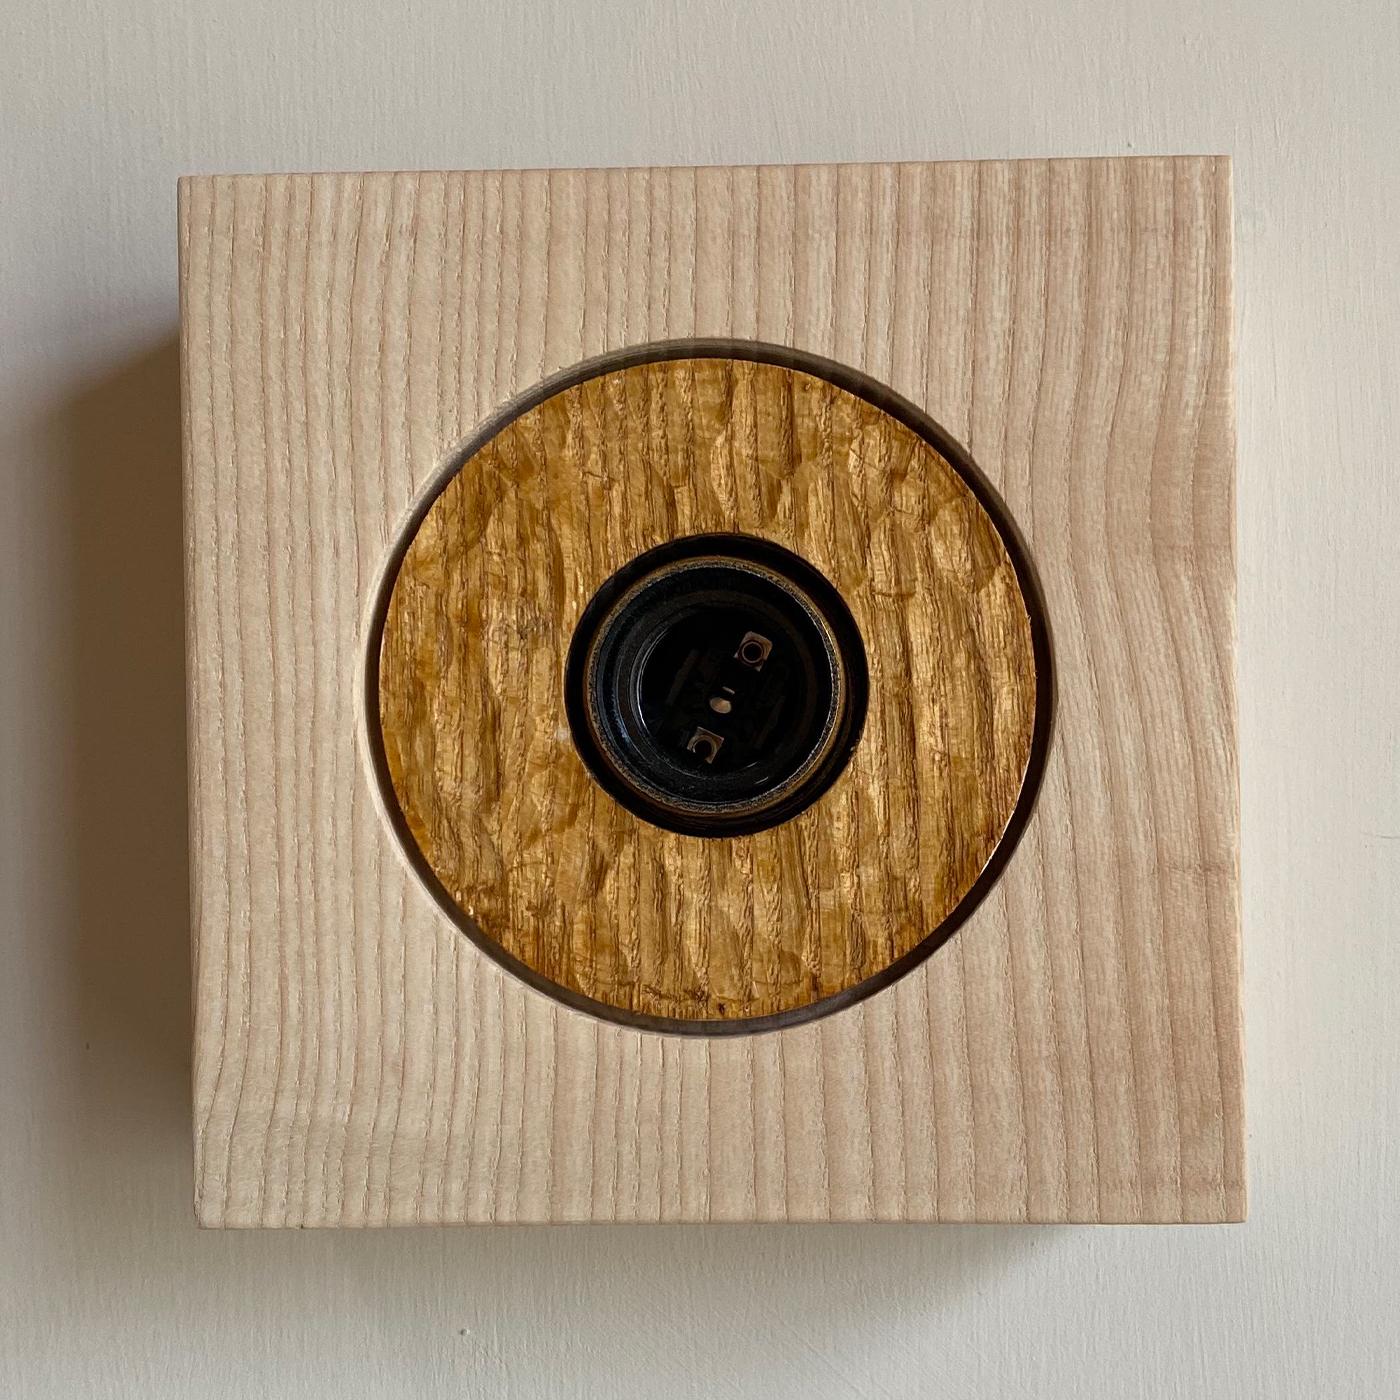 Part of the Book Collection, this ashwood wall lamp is designed by Tuscany-based artist Pietro Meccani and crafted using exclusively natural, non-toxic materials. Carved and finished by hand in stained oak, the circle within the square frame